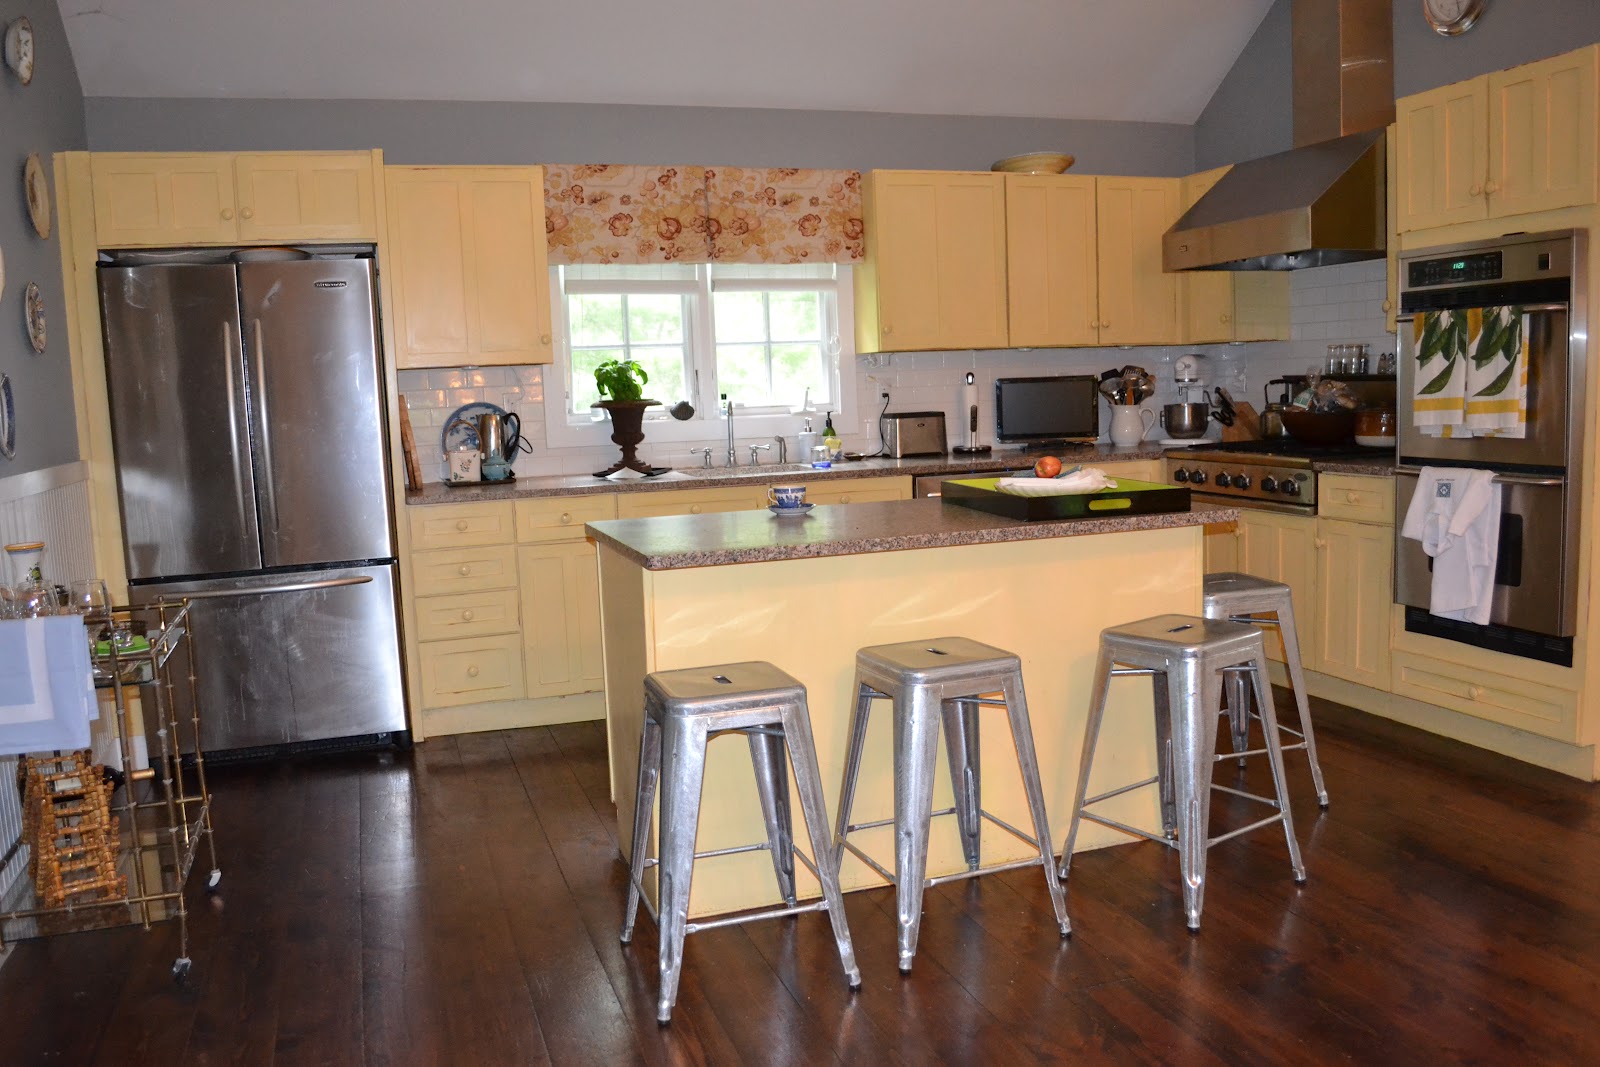 My Kitchen Cabinet Makeover With Help From A Professional Painter